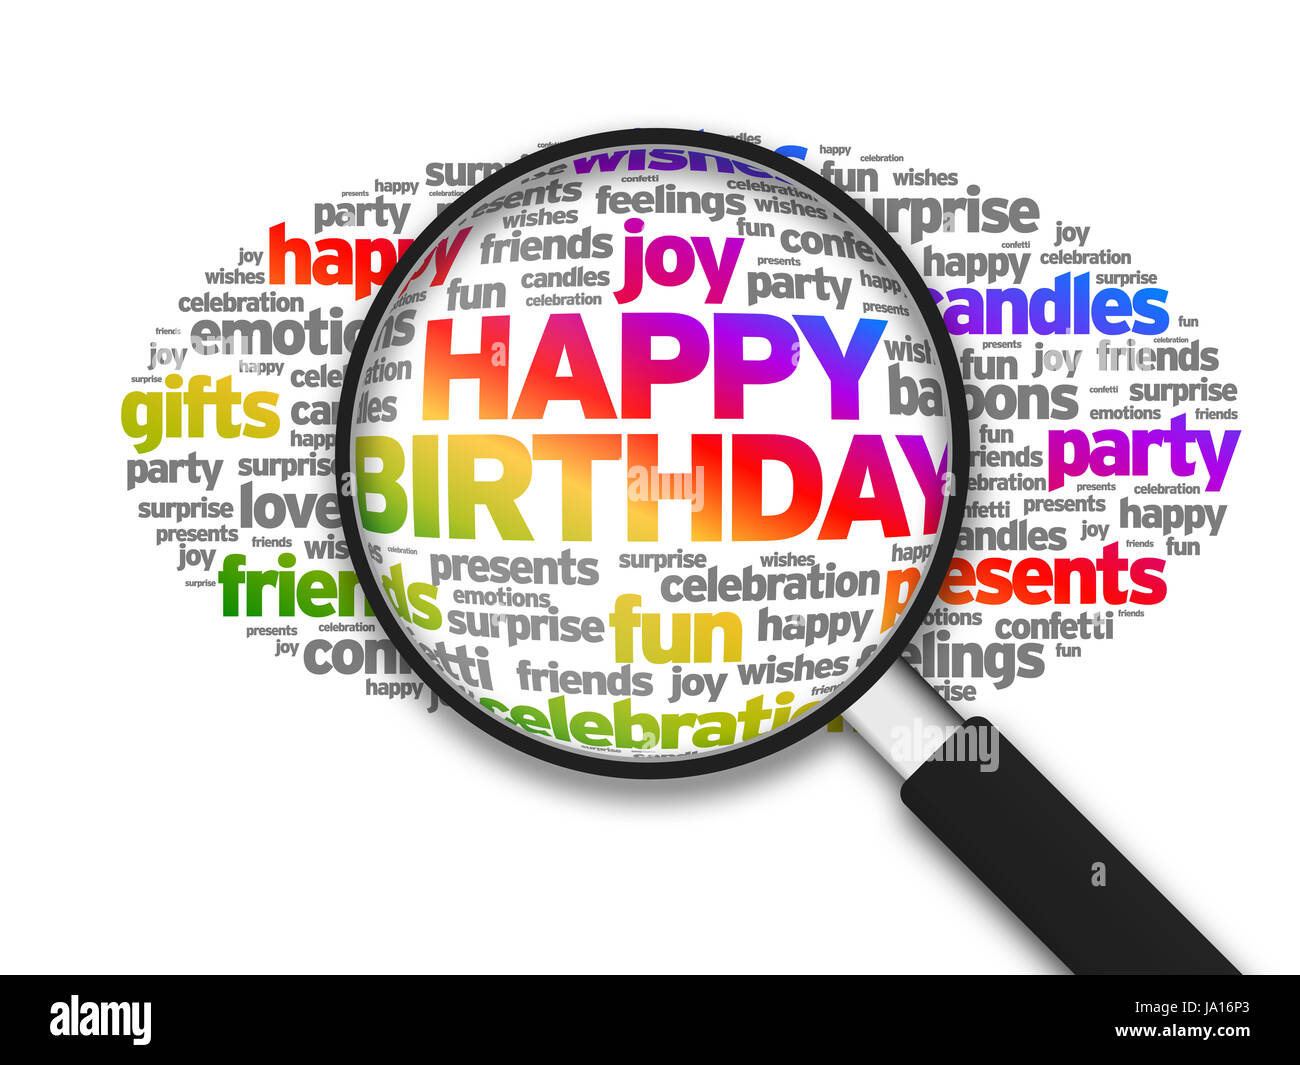 emotions, party, celebration, wishes, desires, delighted, unambitious, Stock Photo